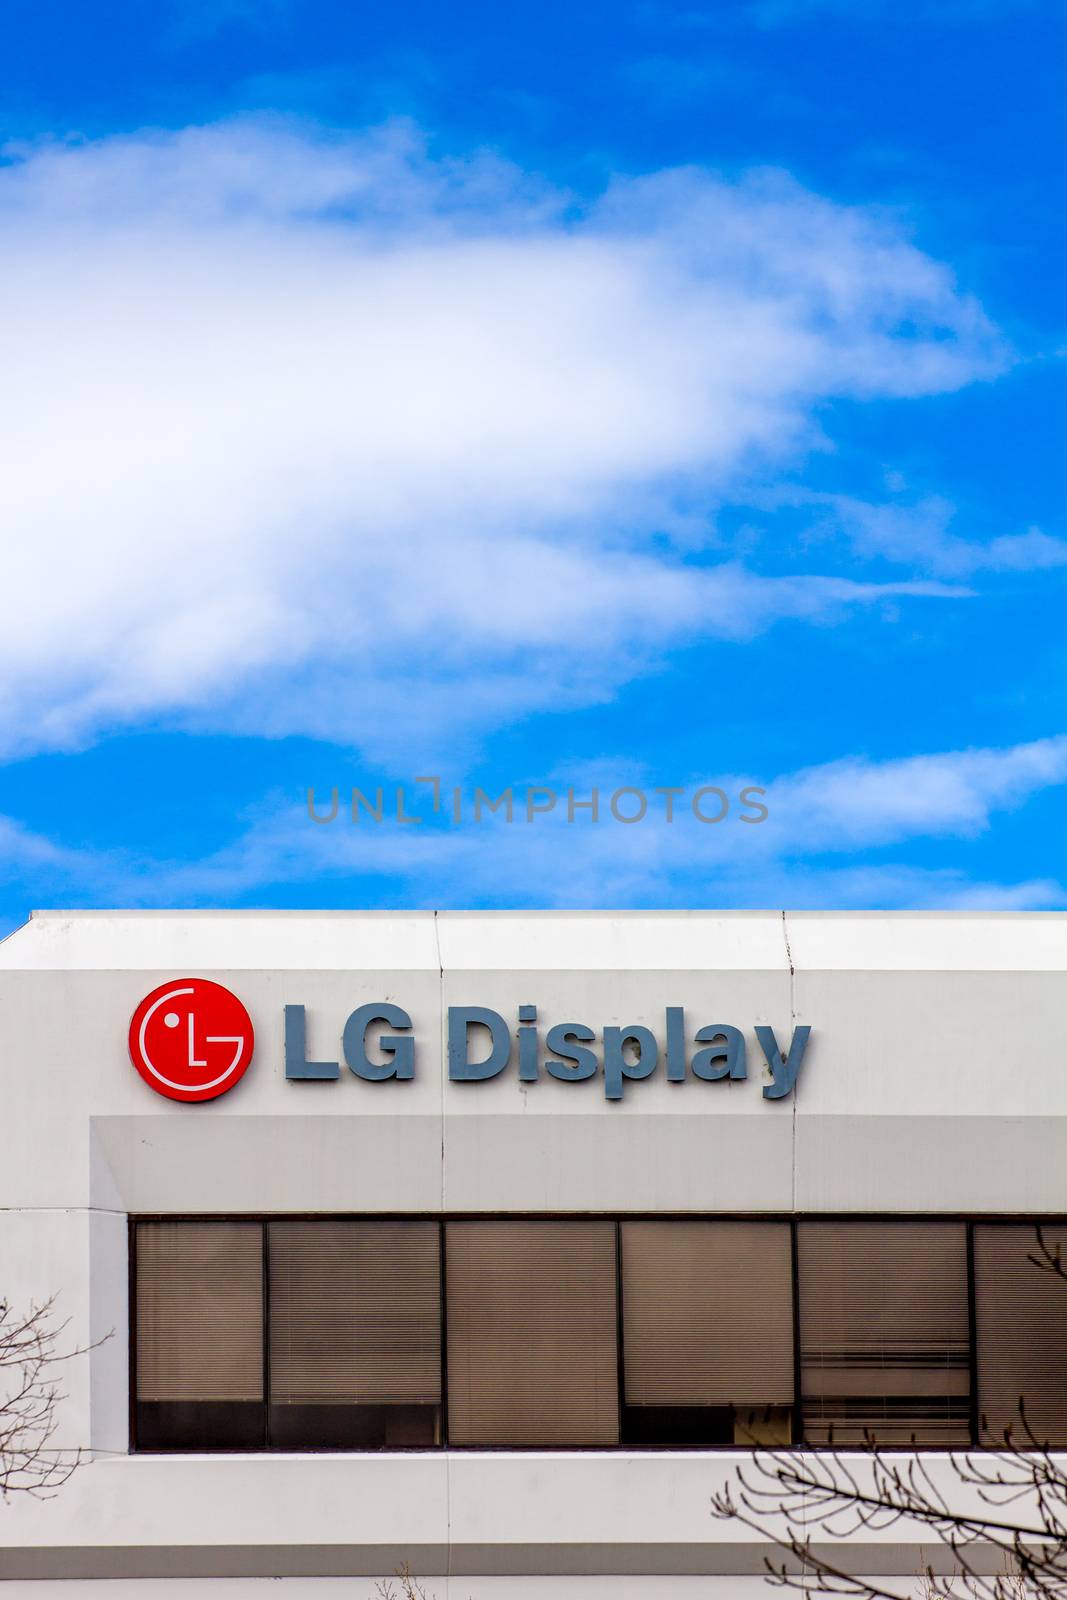 LG Display Headquartes in Silicon Valley by wolterk